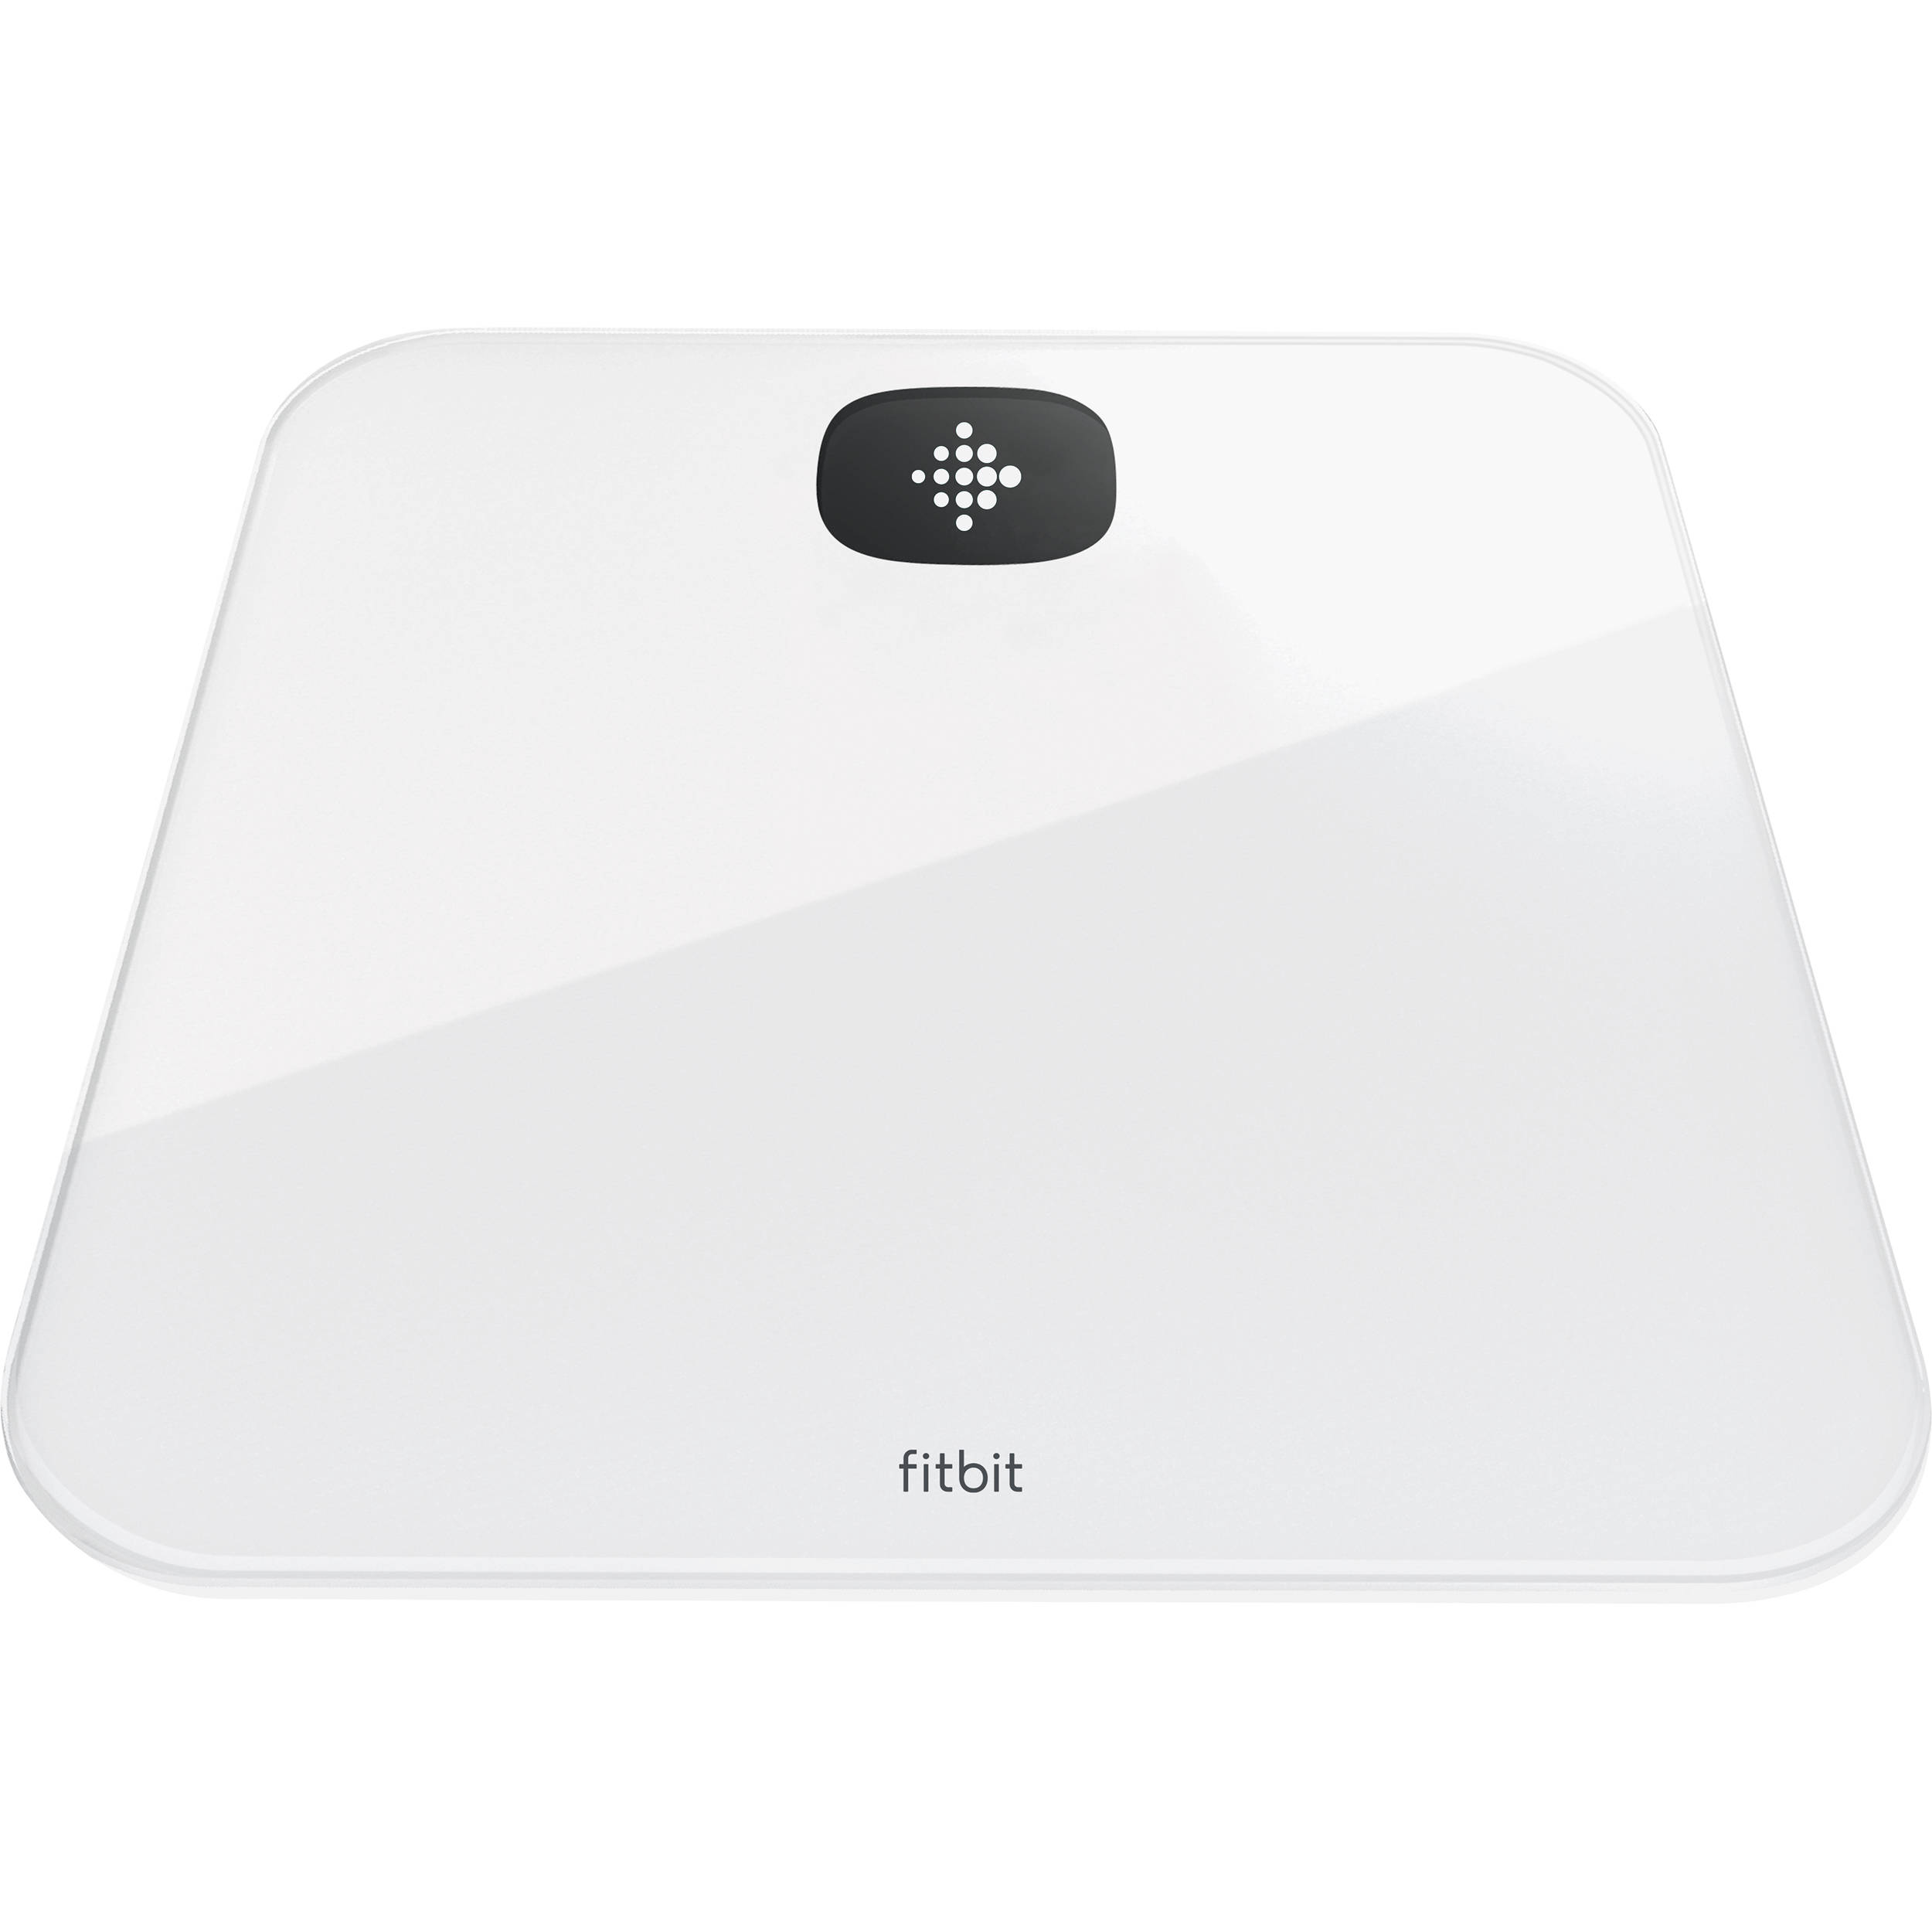 fitbit with scale